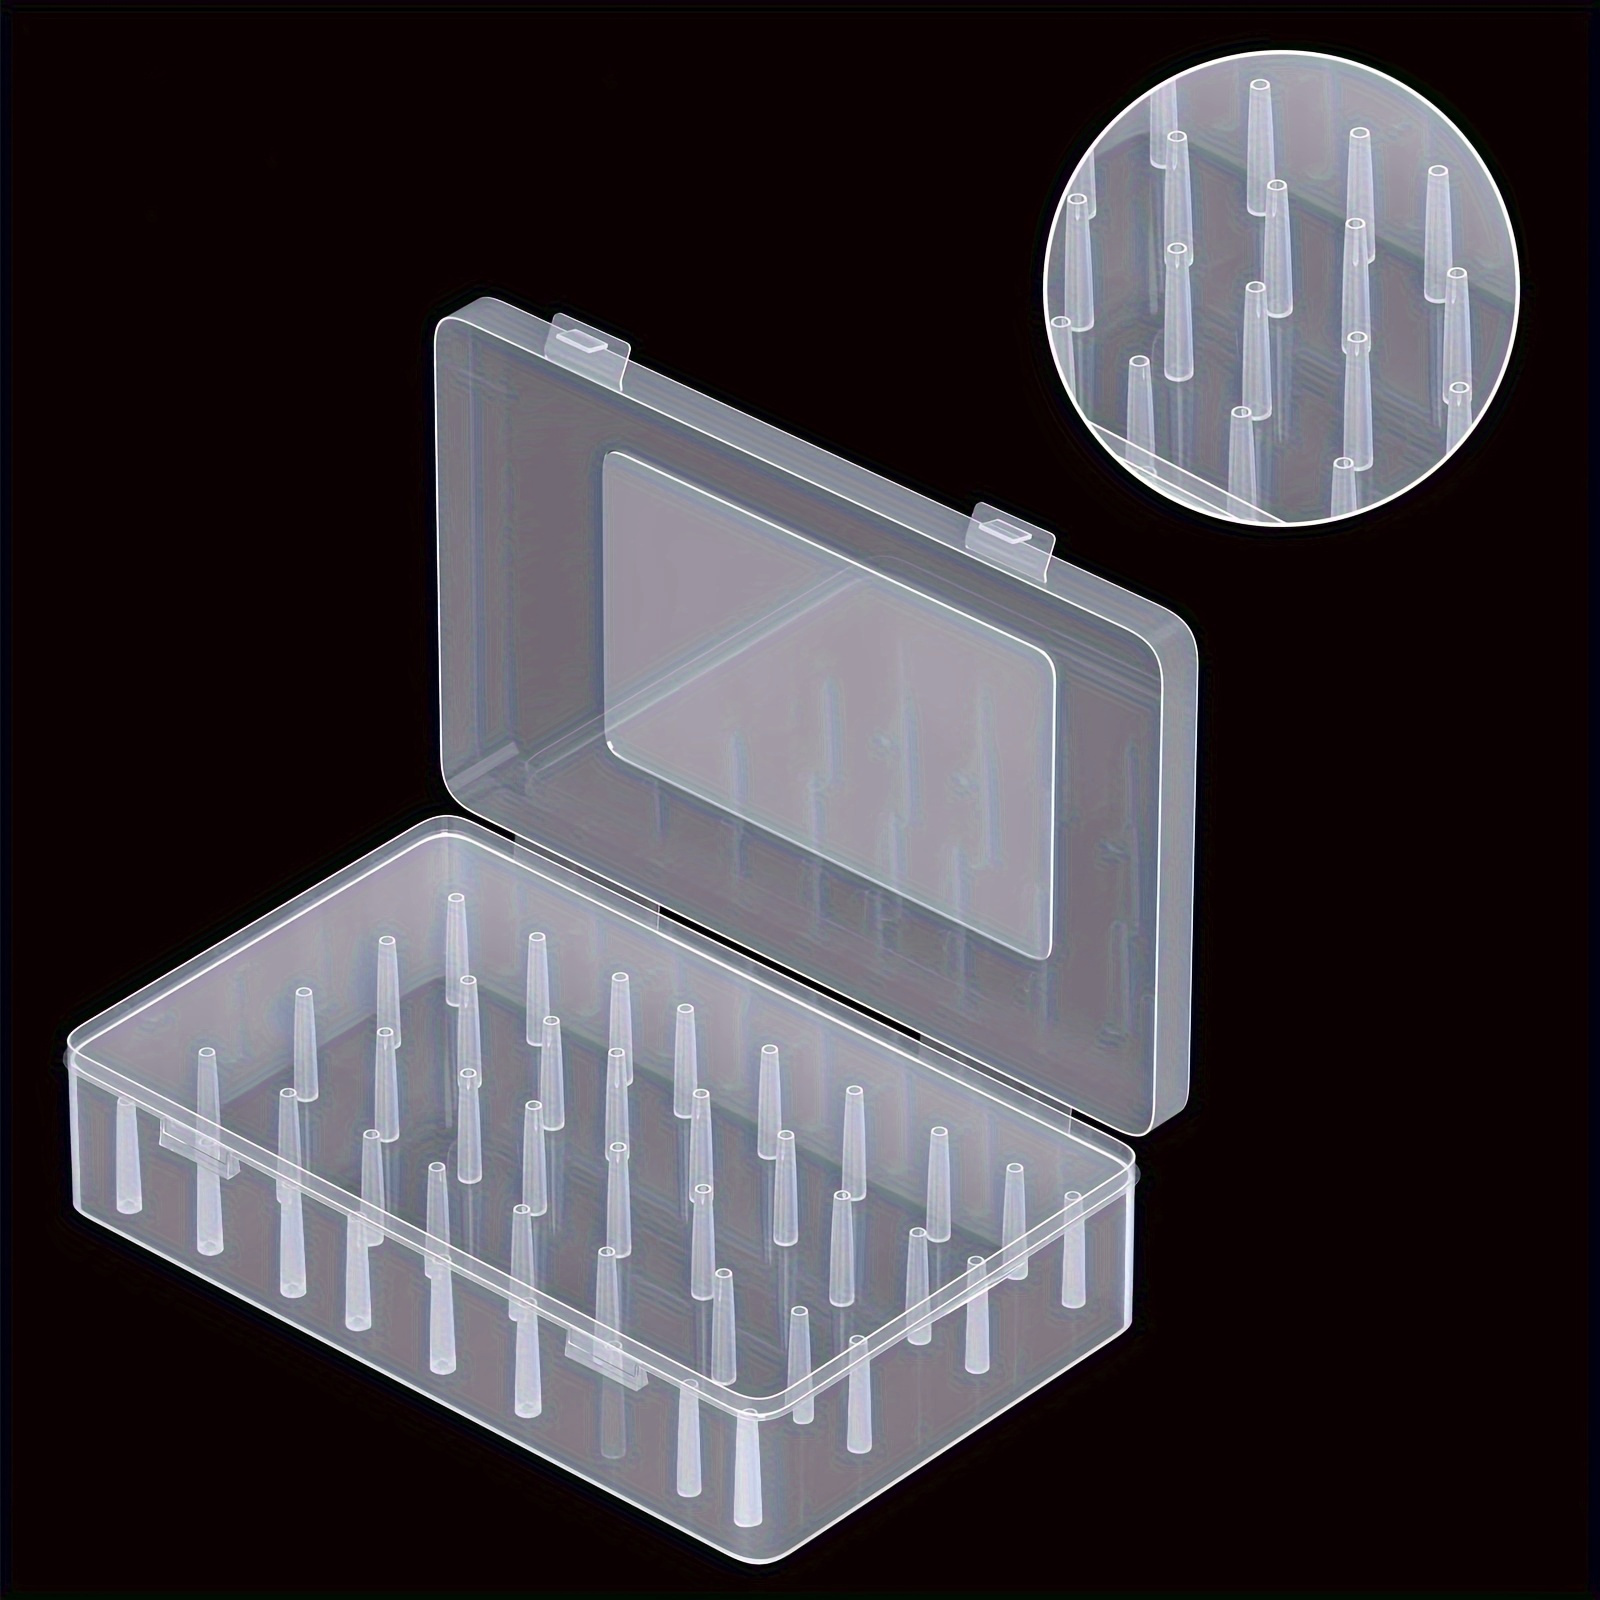 

42-spool Sewing Thread Organizer - Transparent, Durable Pp Plastic Storage Case With Lockable Design For Embroidery & Quilting Accessories